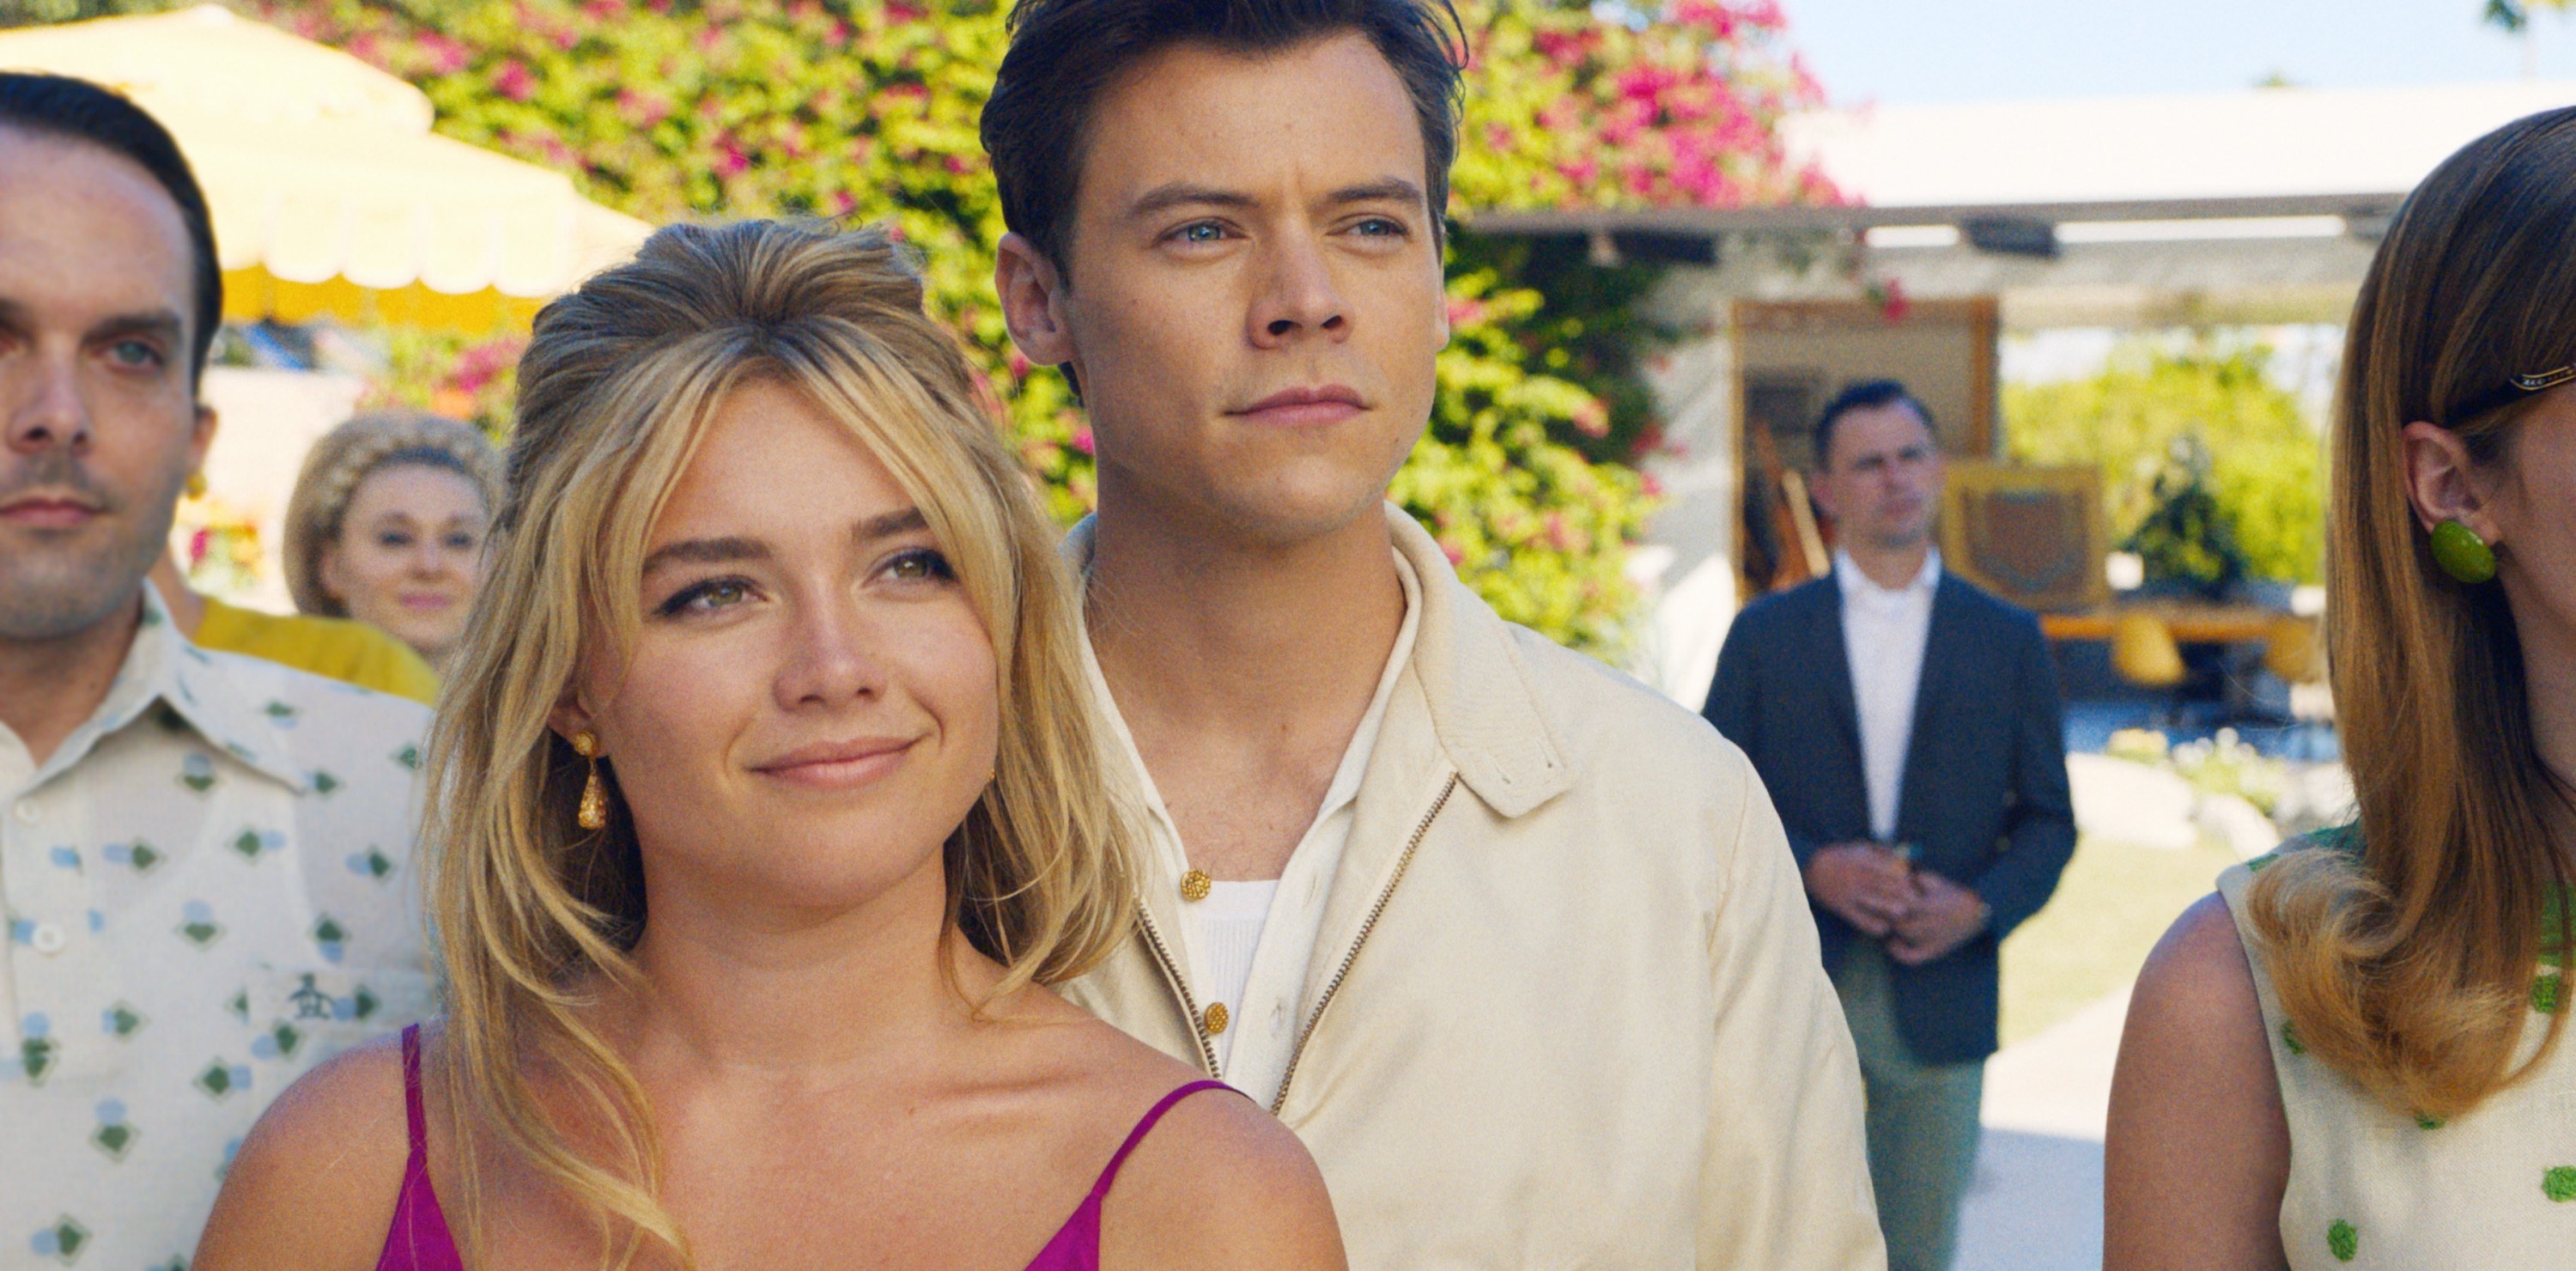 Florence Pugh and Harry Styles in Dont Worry Darling